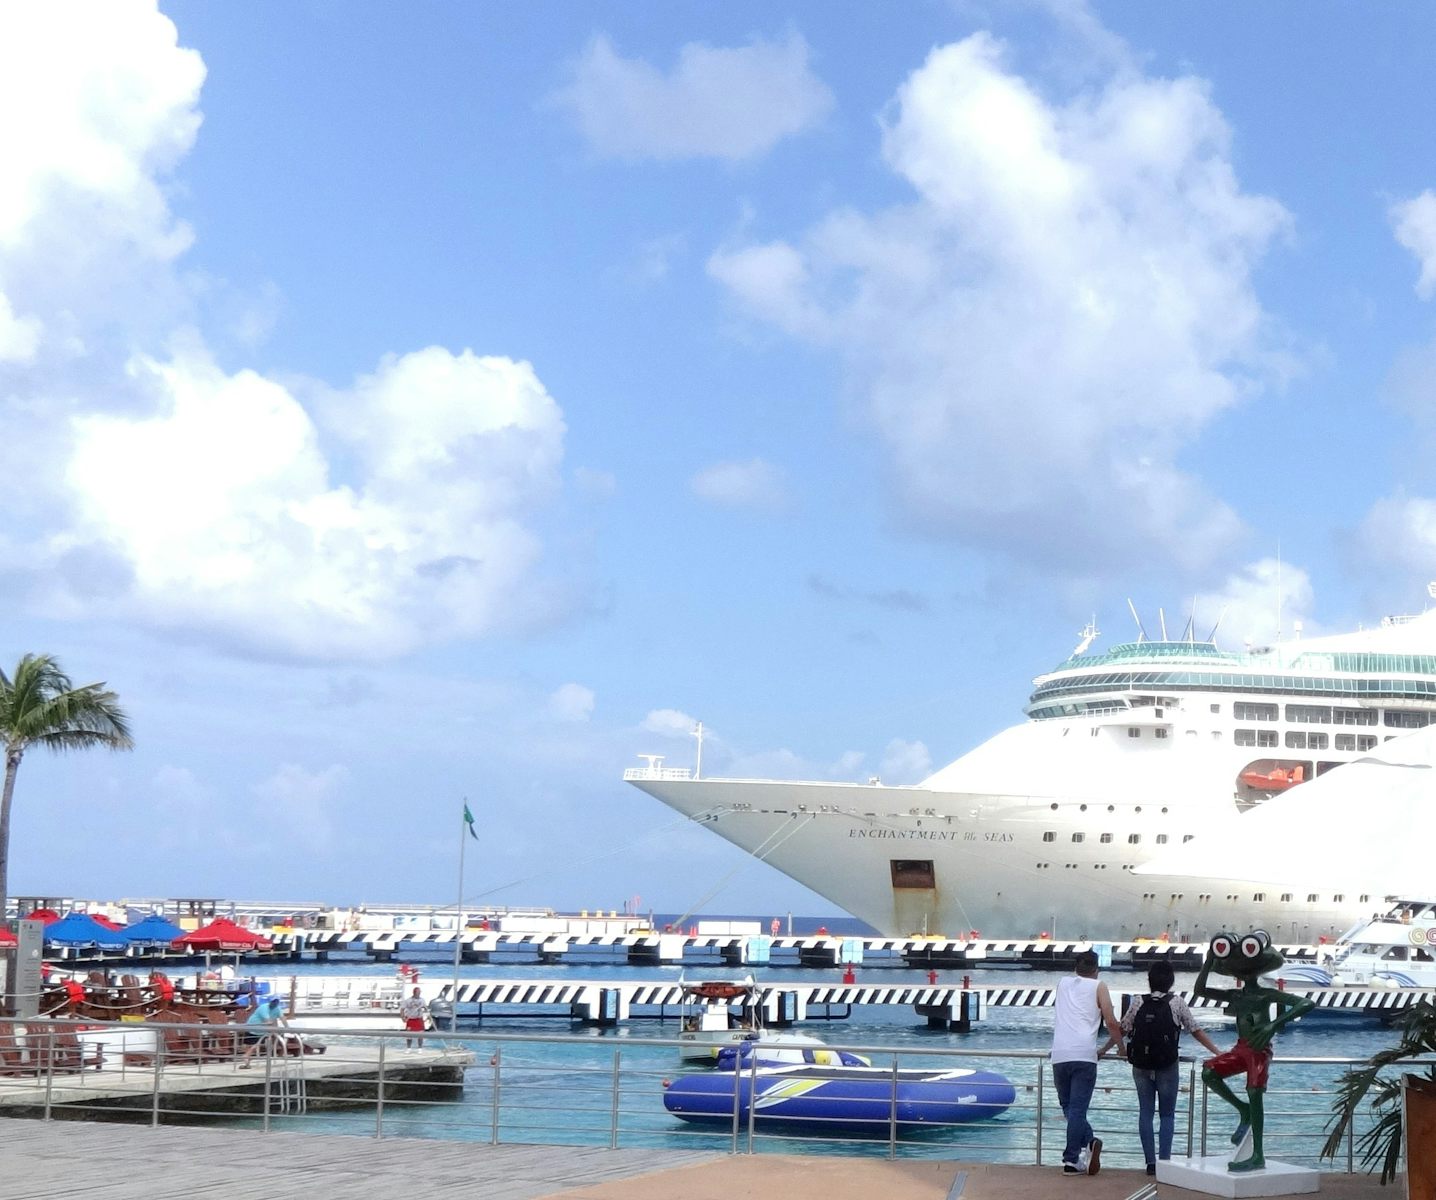 EoS at the pier in Costa Maya